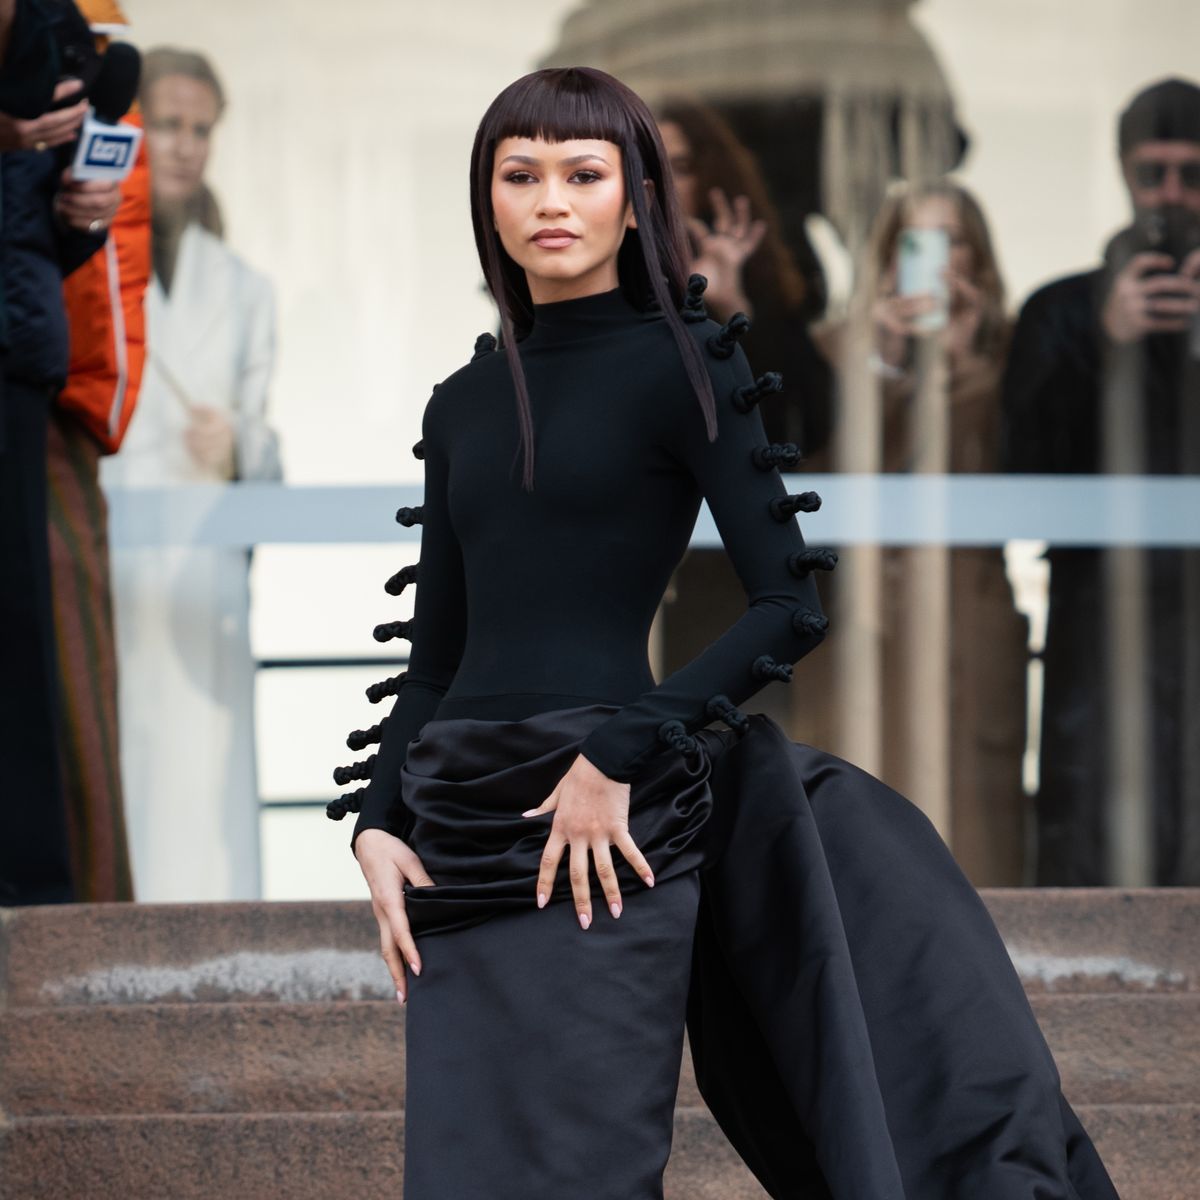 paris, france january 22 zendaya is seen during the schiaparelli haute couture spring summer 2024 as part of paris fashion week on january 22, 2024 in paris, france photo by claudio laveniagetty images